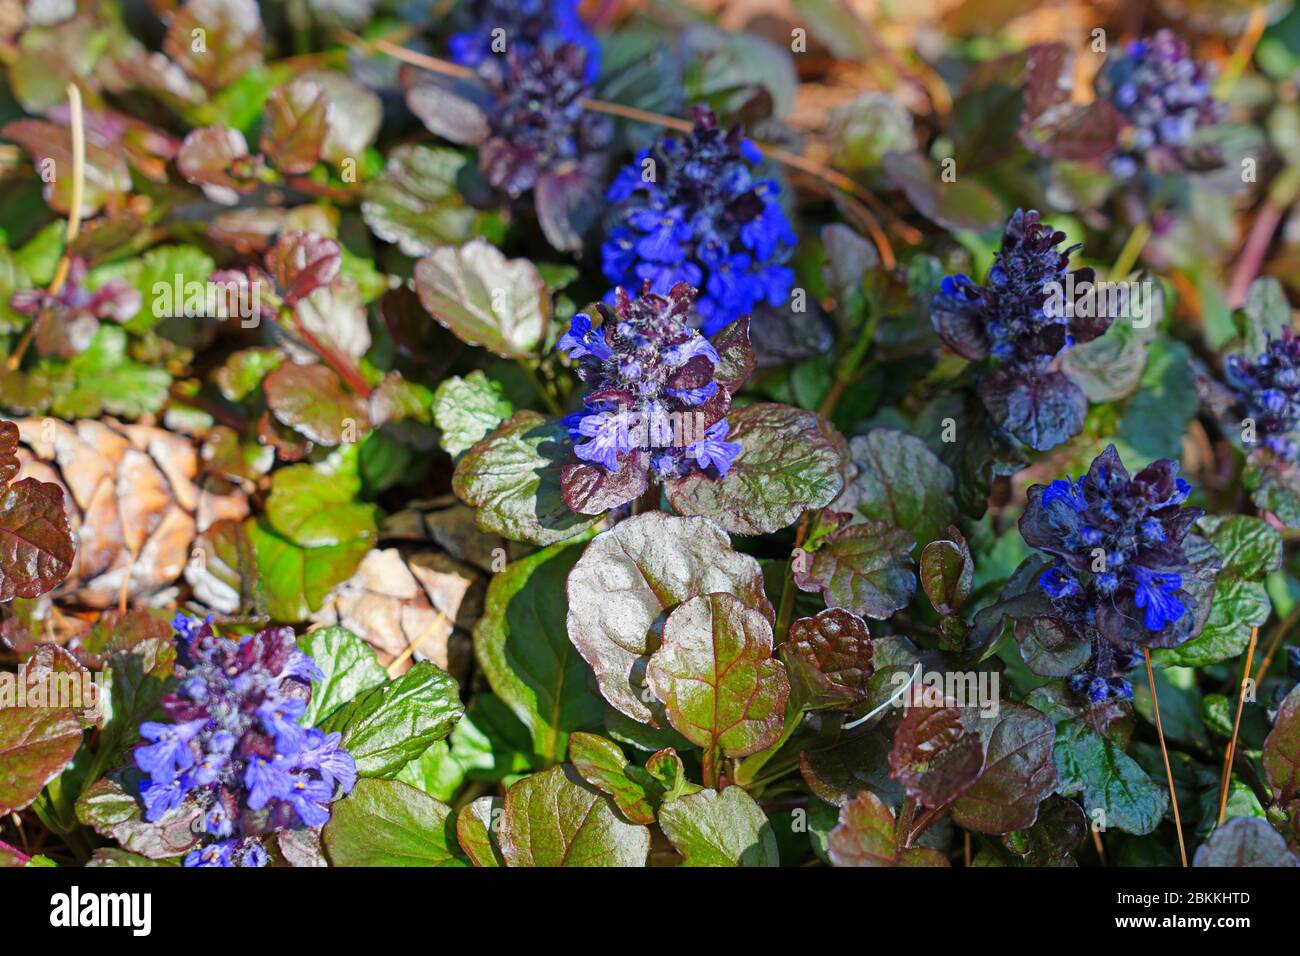 Carpet bugle weed (ajuga reptans) flower spikes with purple leaves in the spring garden Stock Photo